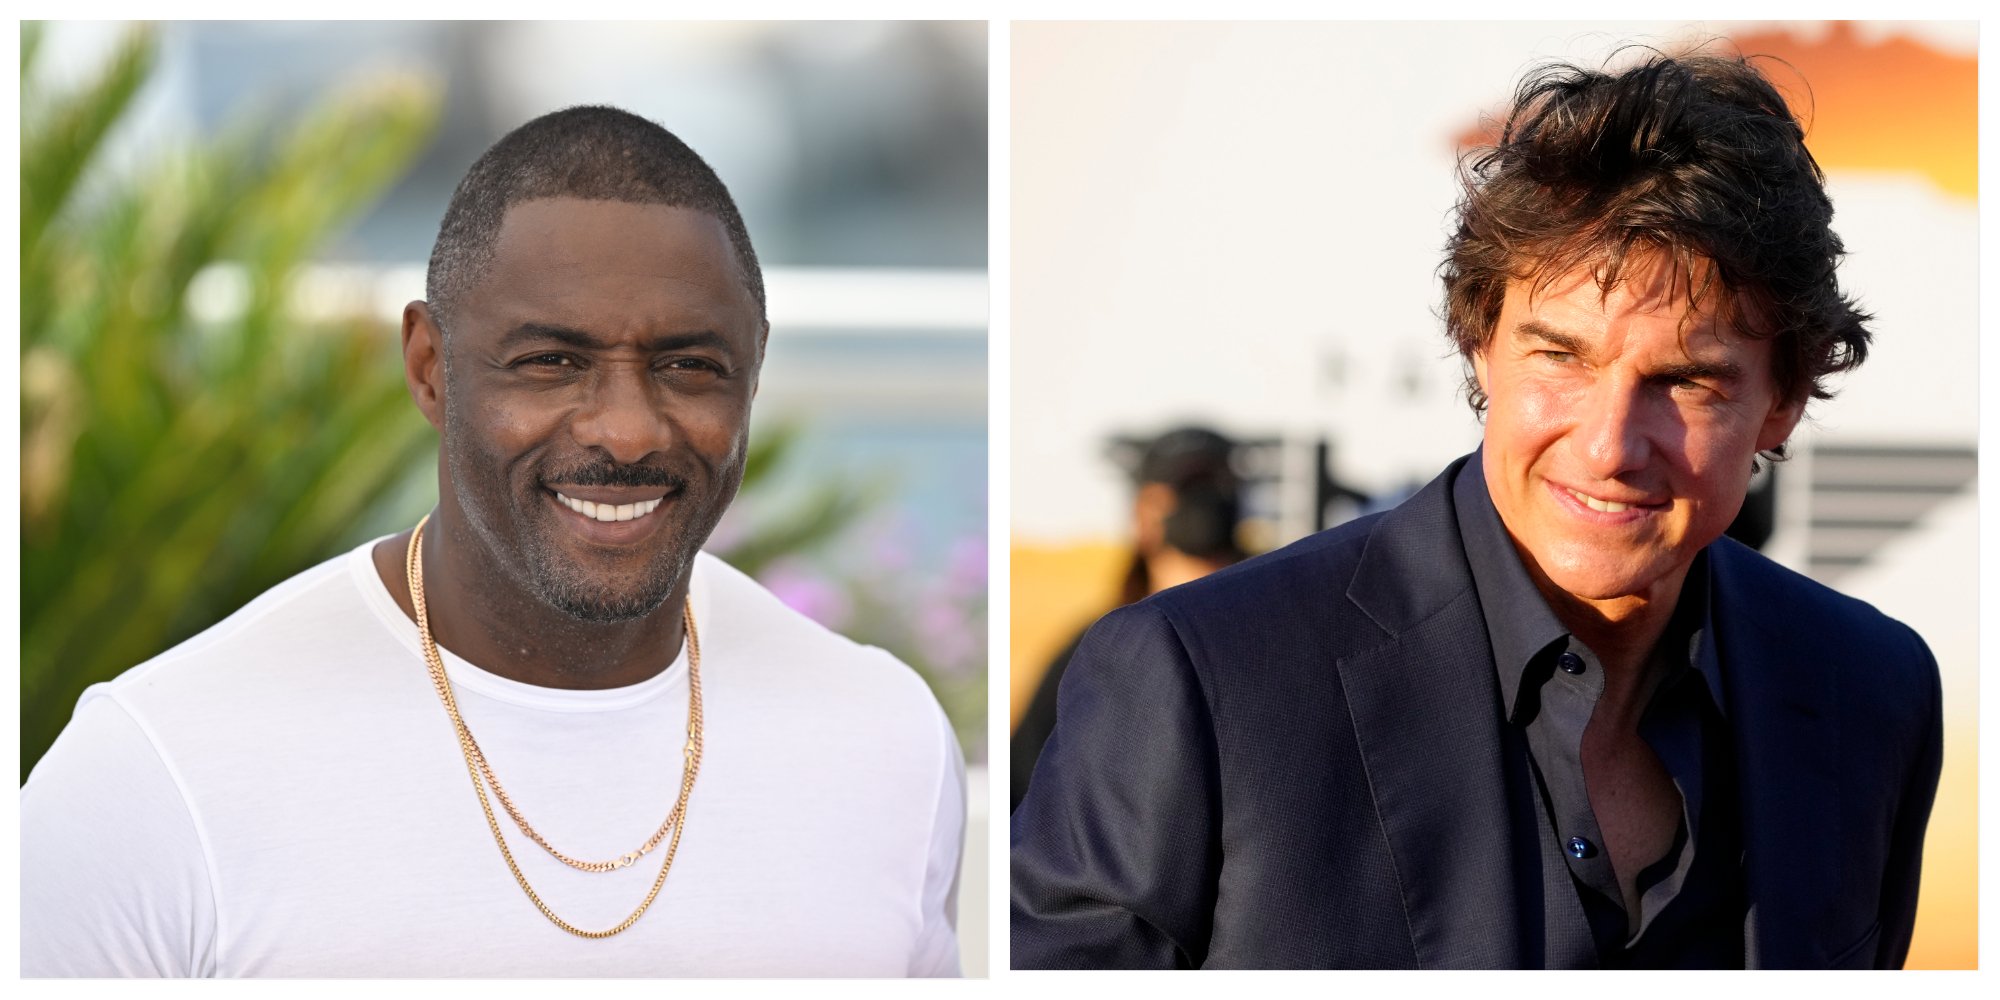 ‘Top Gun’ Maverick Was Gunning for ‘Beast’ Movie Role That Went to Idris Elba, EP Reveals [Exclusive]